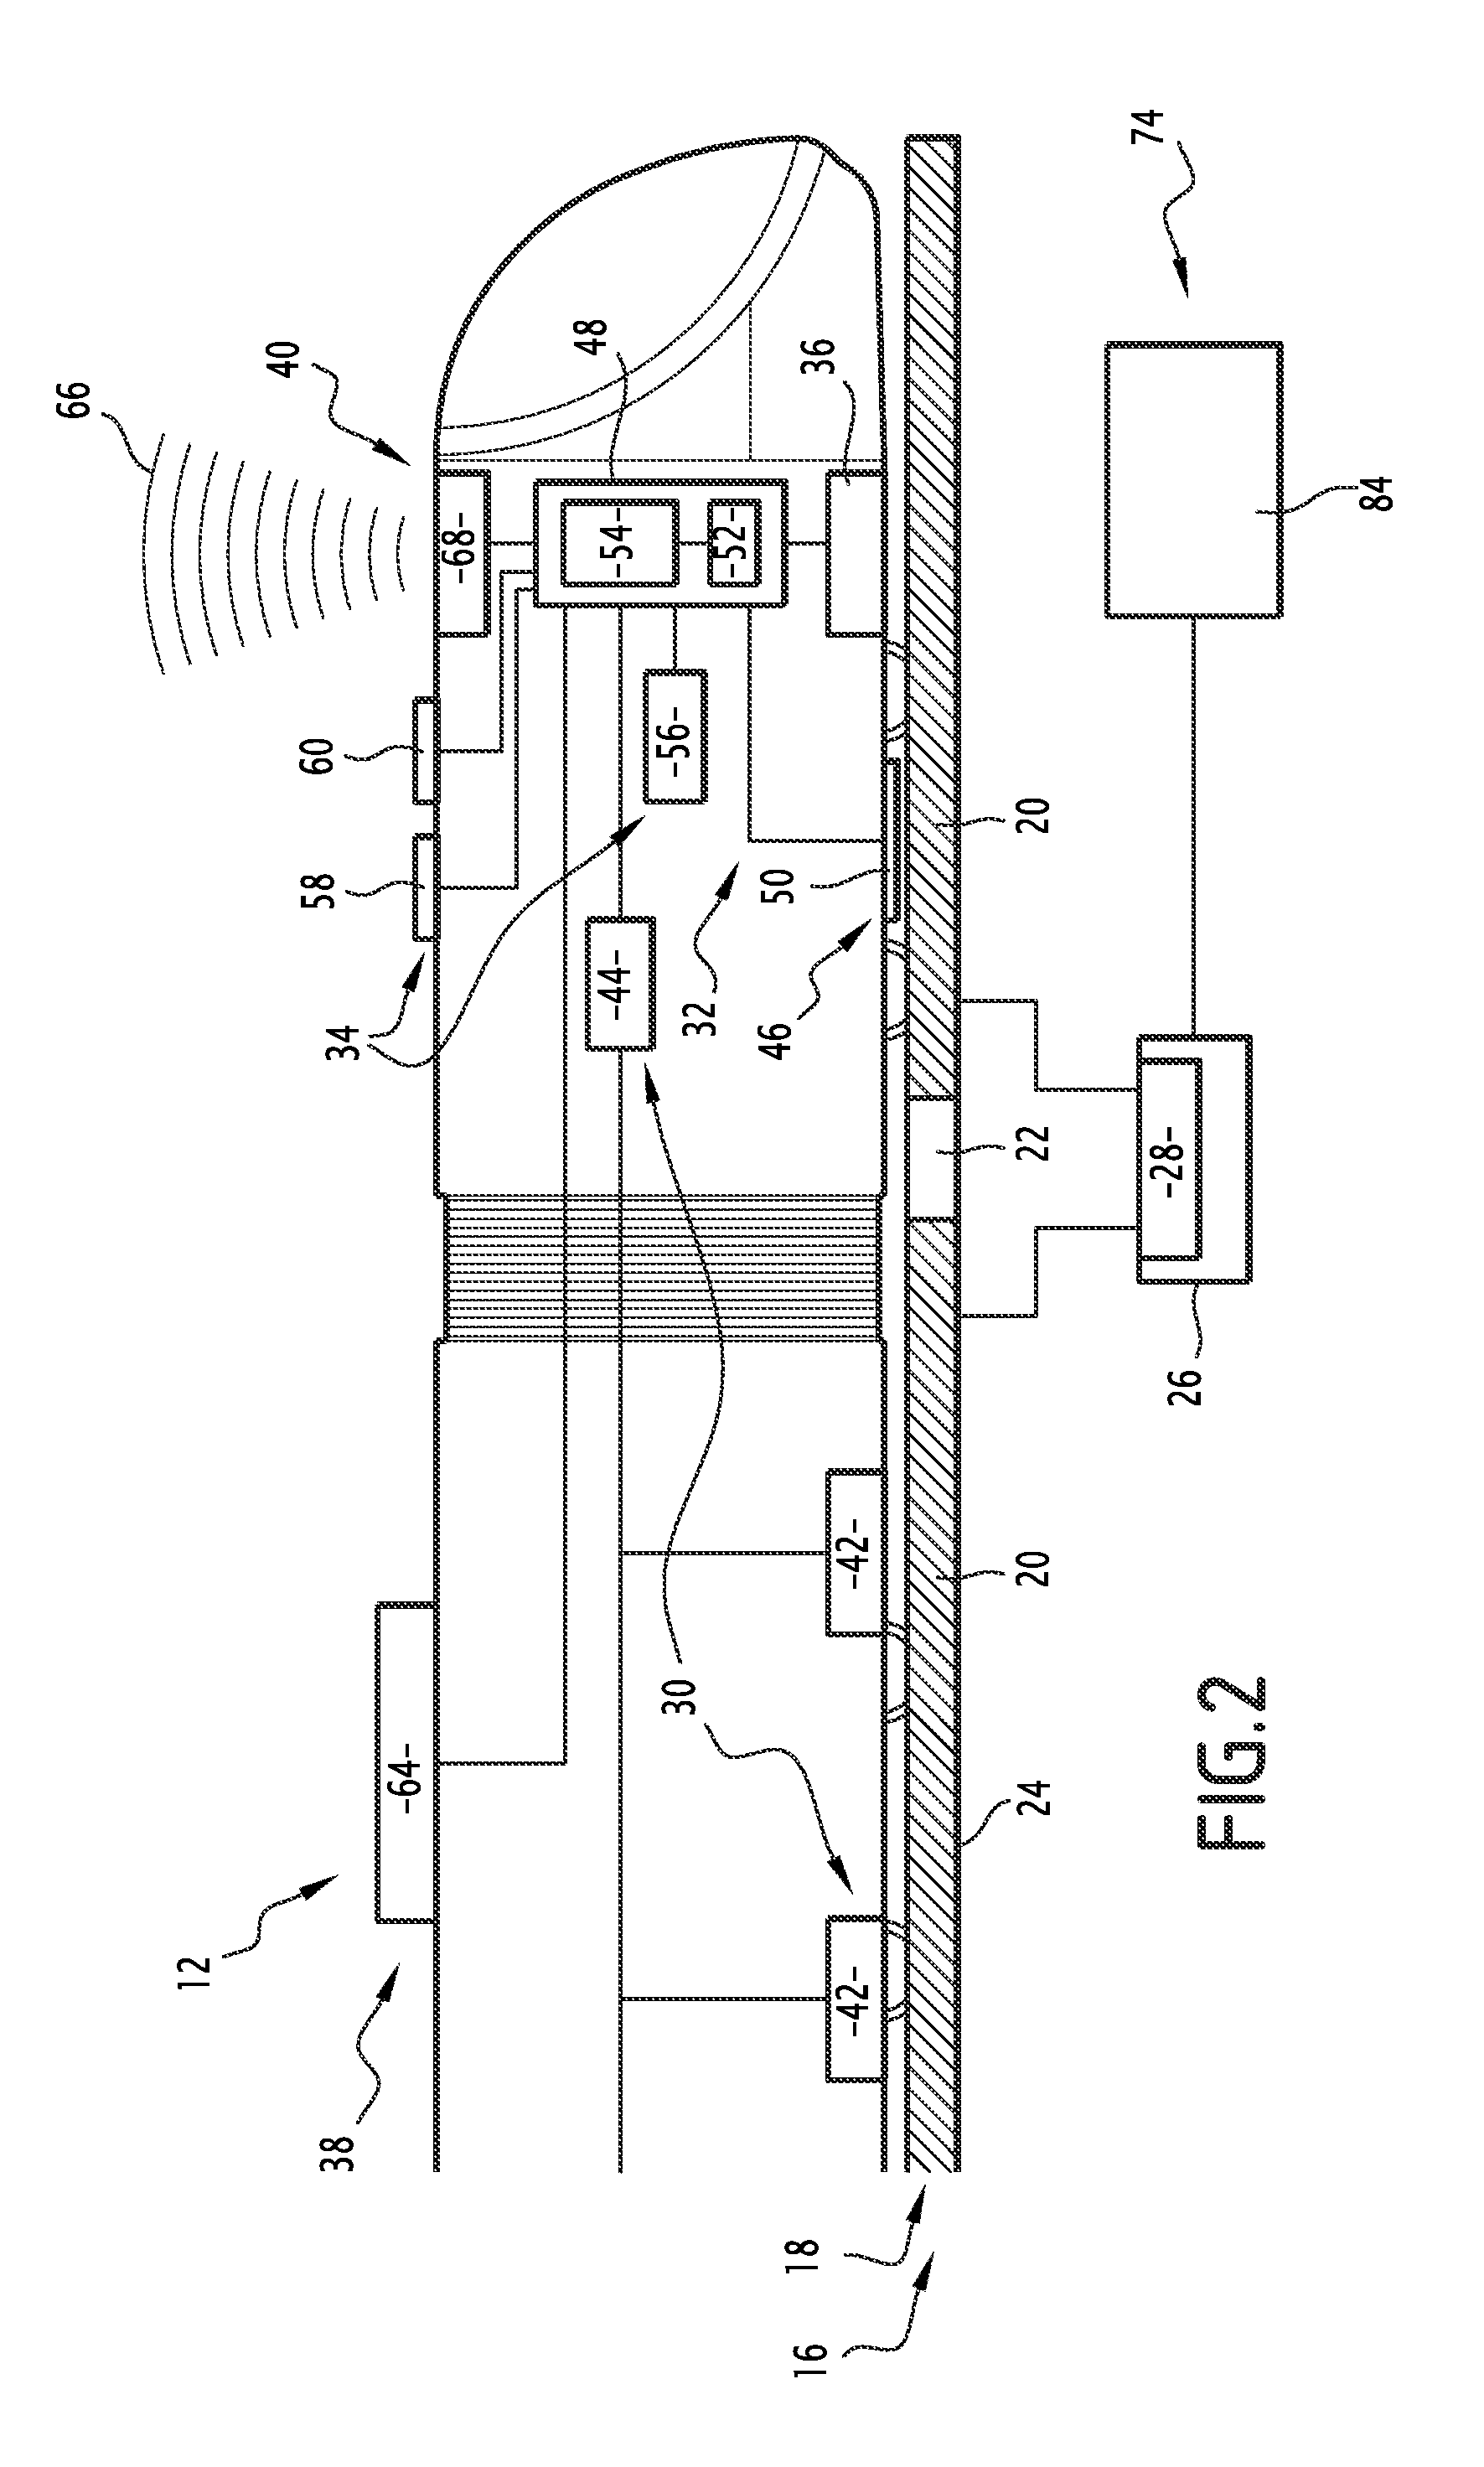 Guided ground vehicle including a device for managing a derailment of the vehicle, and associated derailment management method